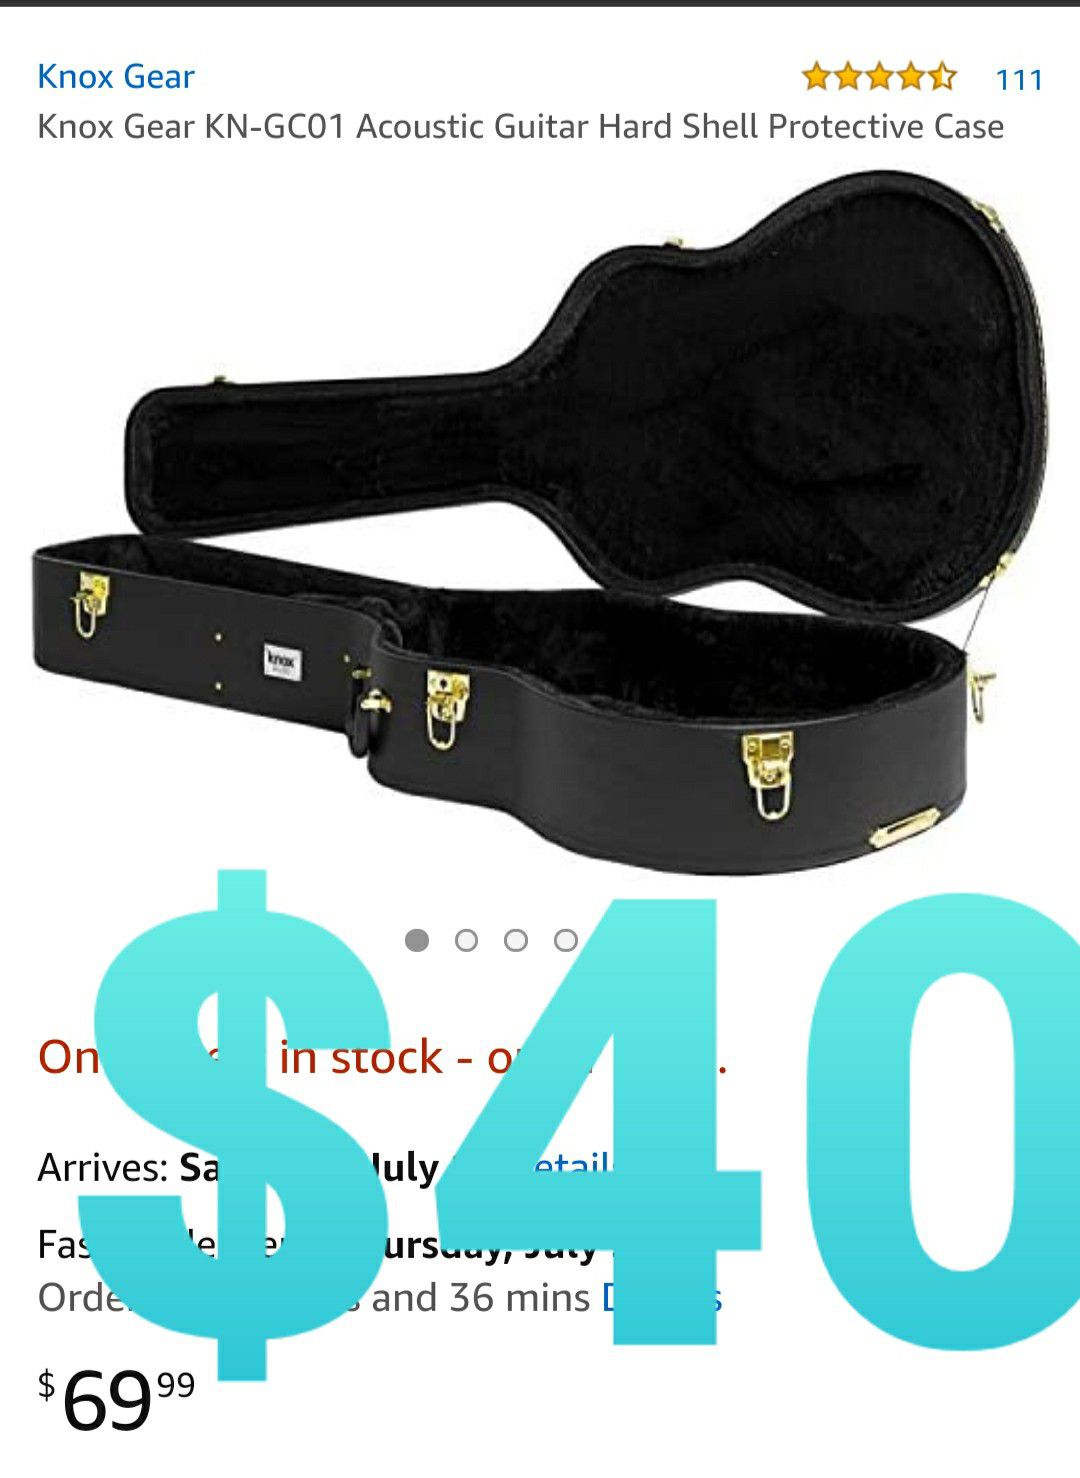 Acoustic Guitar Hard Shell Protective Case